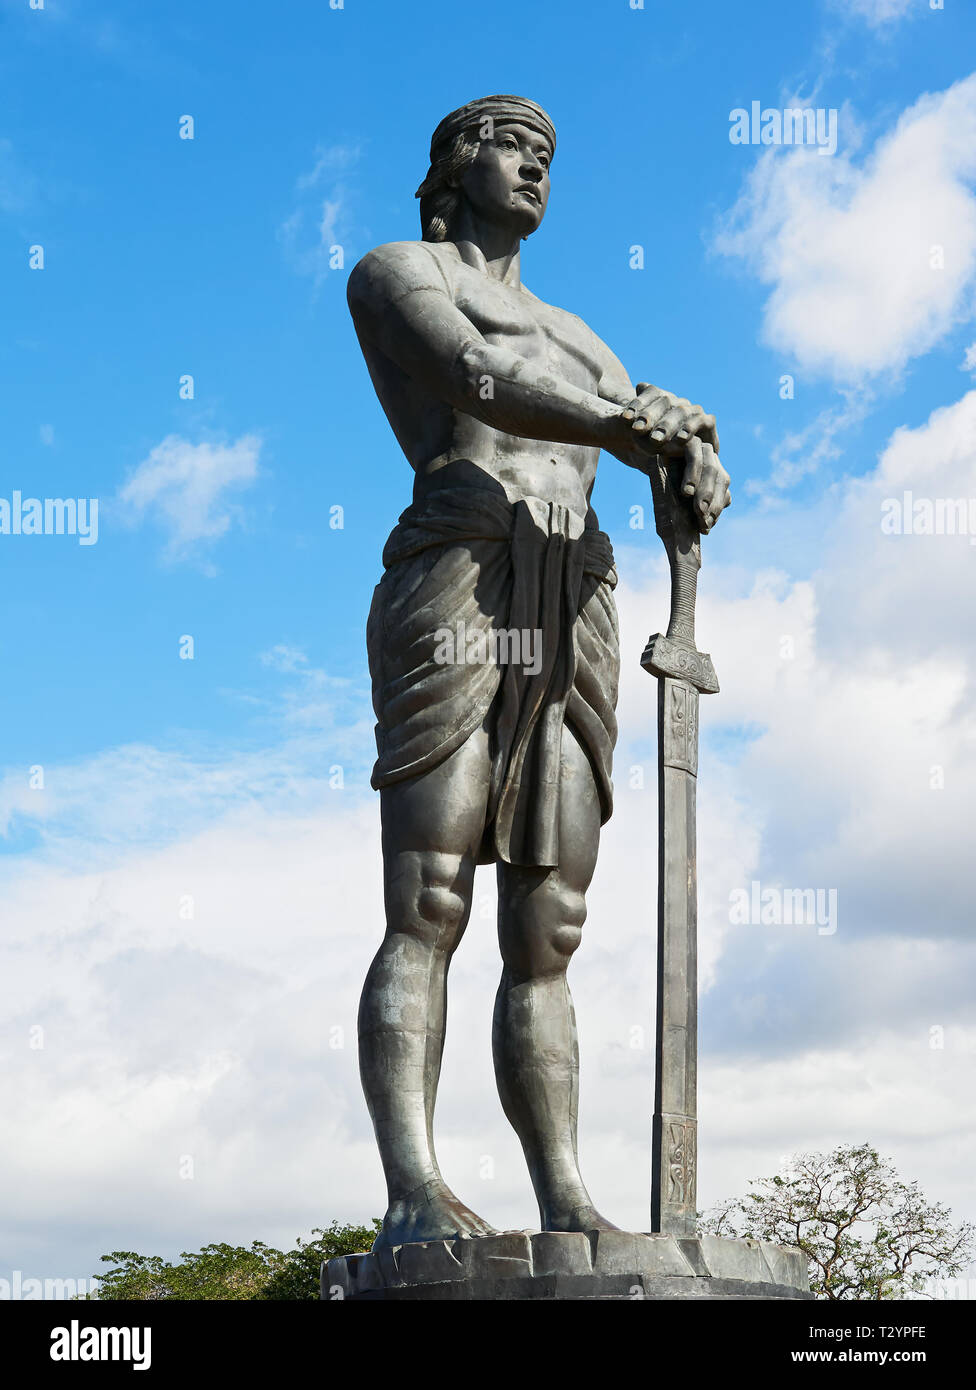 Manila, Philippines: Low-angle view of the 40-foot bronze Lapu-Lapu statue located at the Agrifina Circle in Rizal Park Stock Photo